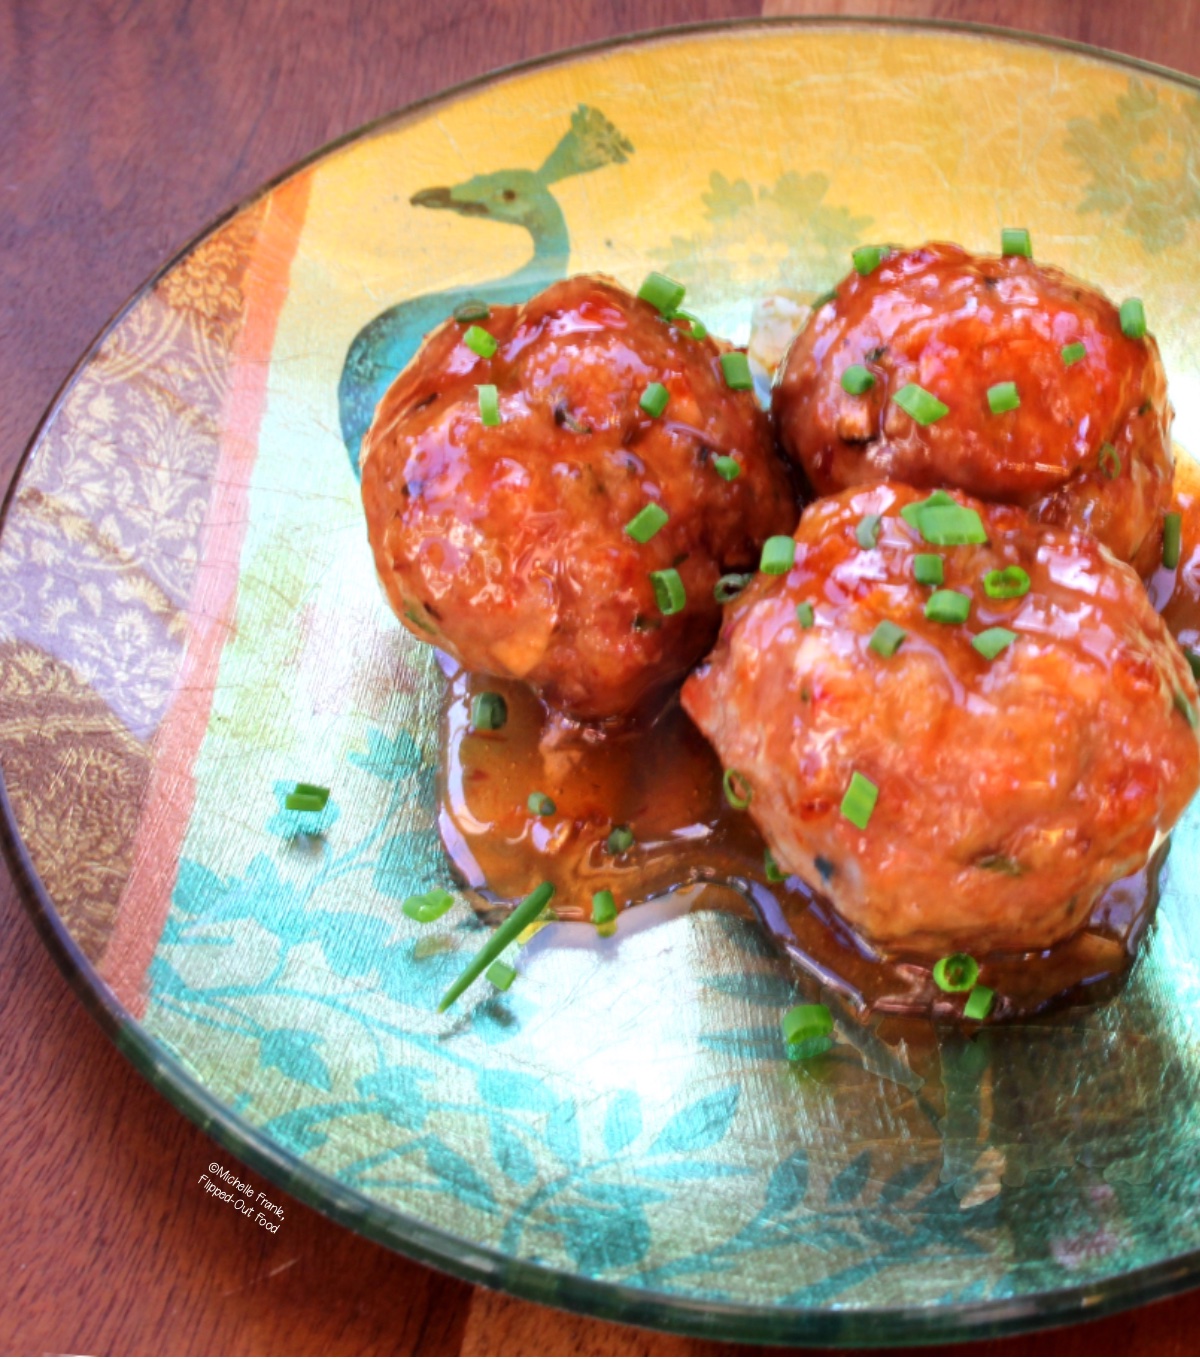 Three Asian meatballs on a decorative party plate. The meatballs are garnished with minced chives.